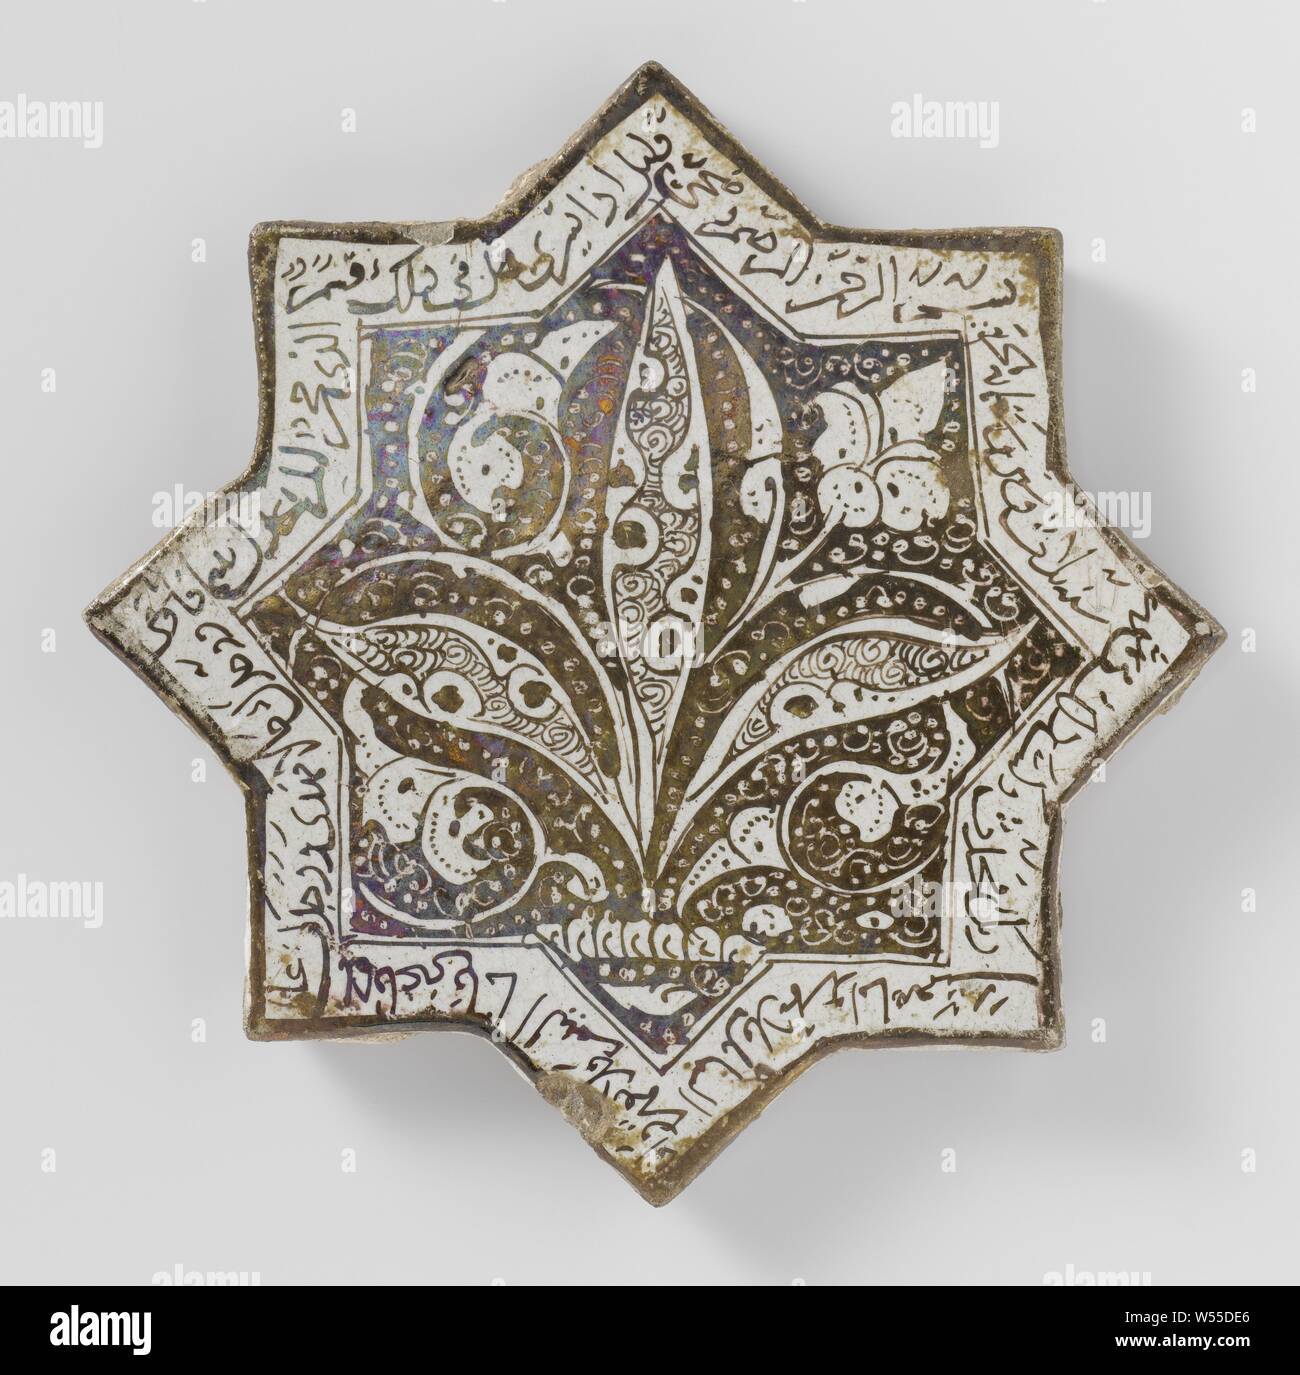 Star-shaped tile with an inscription and floral scrolls, star-shaped tile made of earthenware, painted in luster with a text in Persian or Arabic script and floral scrolls., anonymous, Kashan, c. 1262 - c. 1265, earthenware, glaze, luster (textile), vitrification, d 21 cm × t 1.5 cm Stock Photo